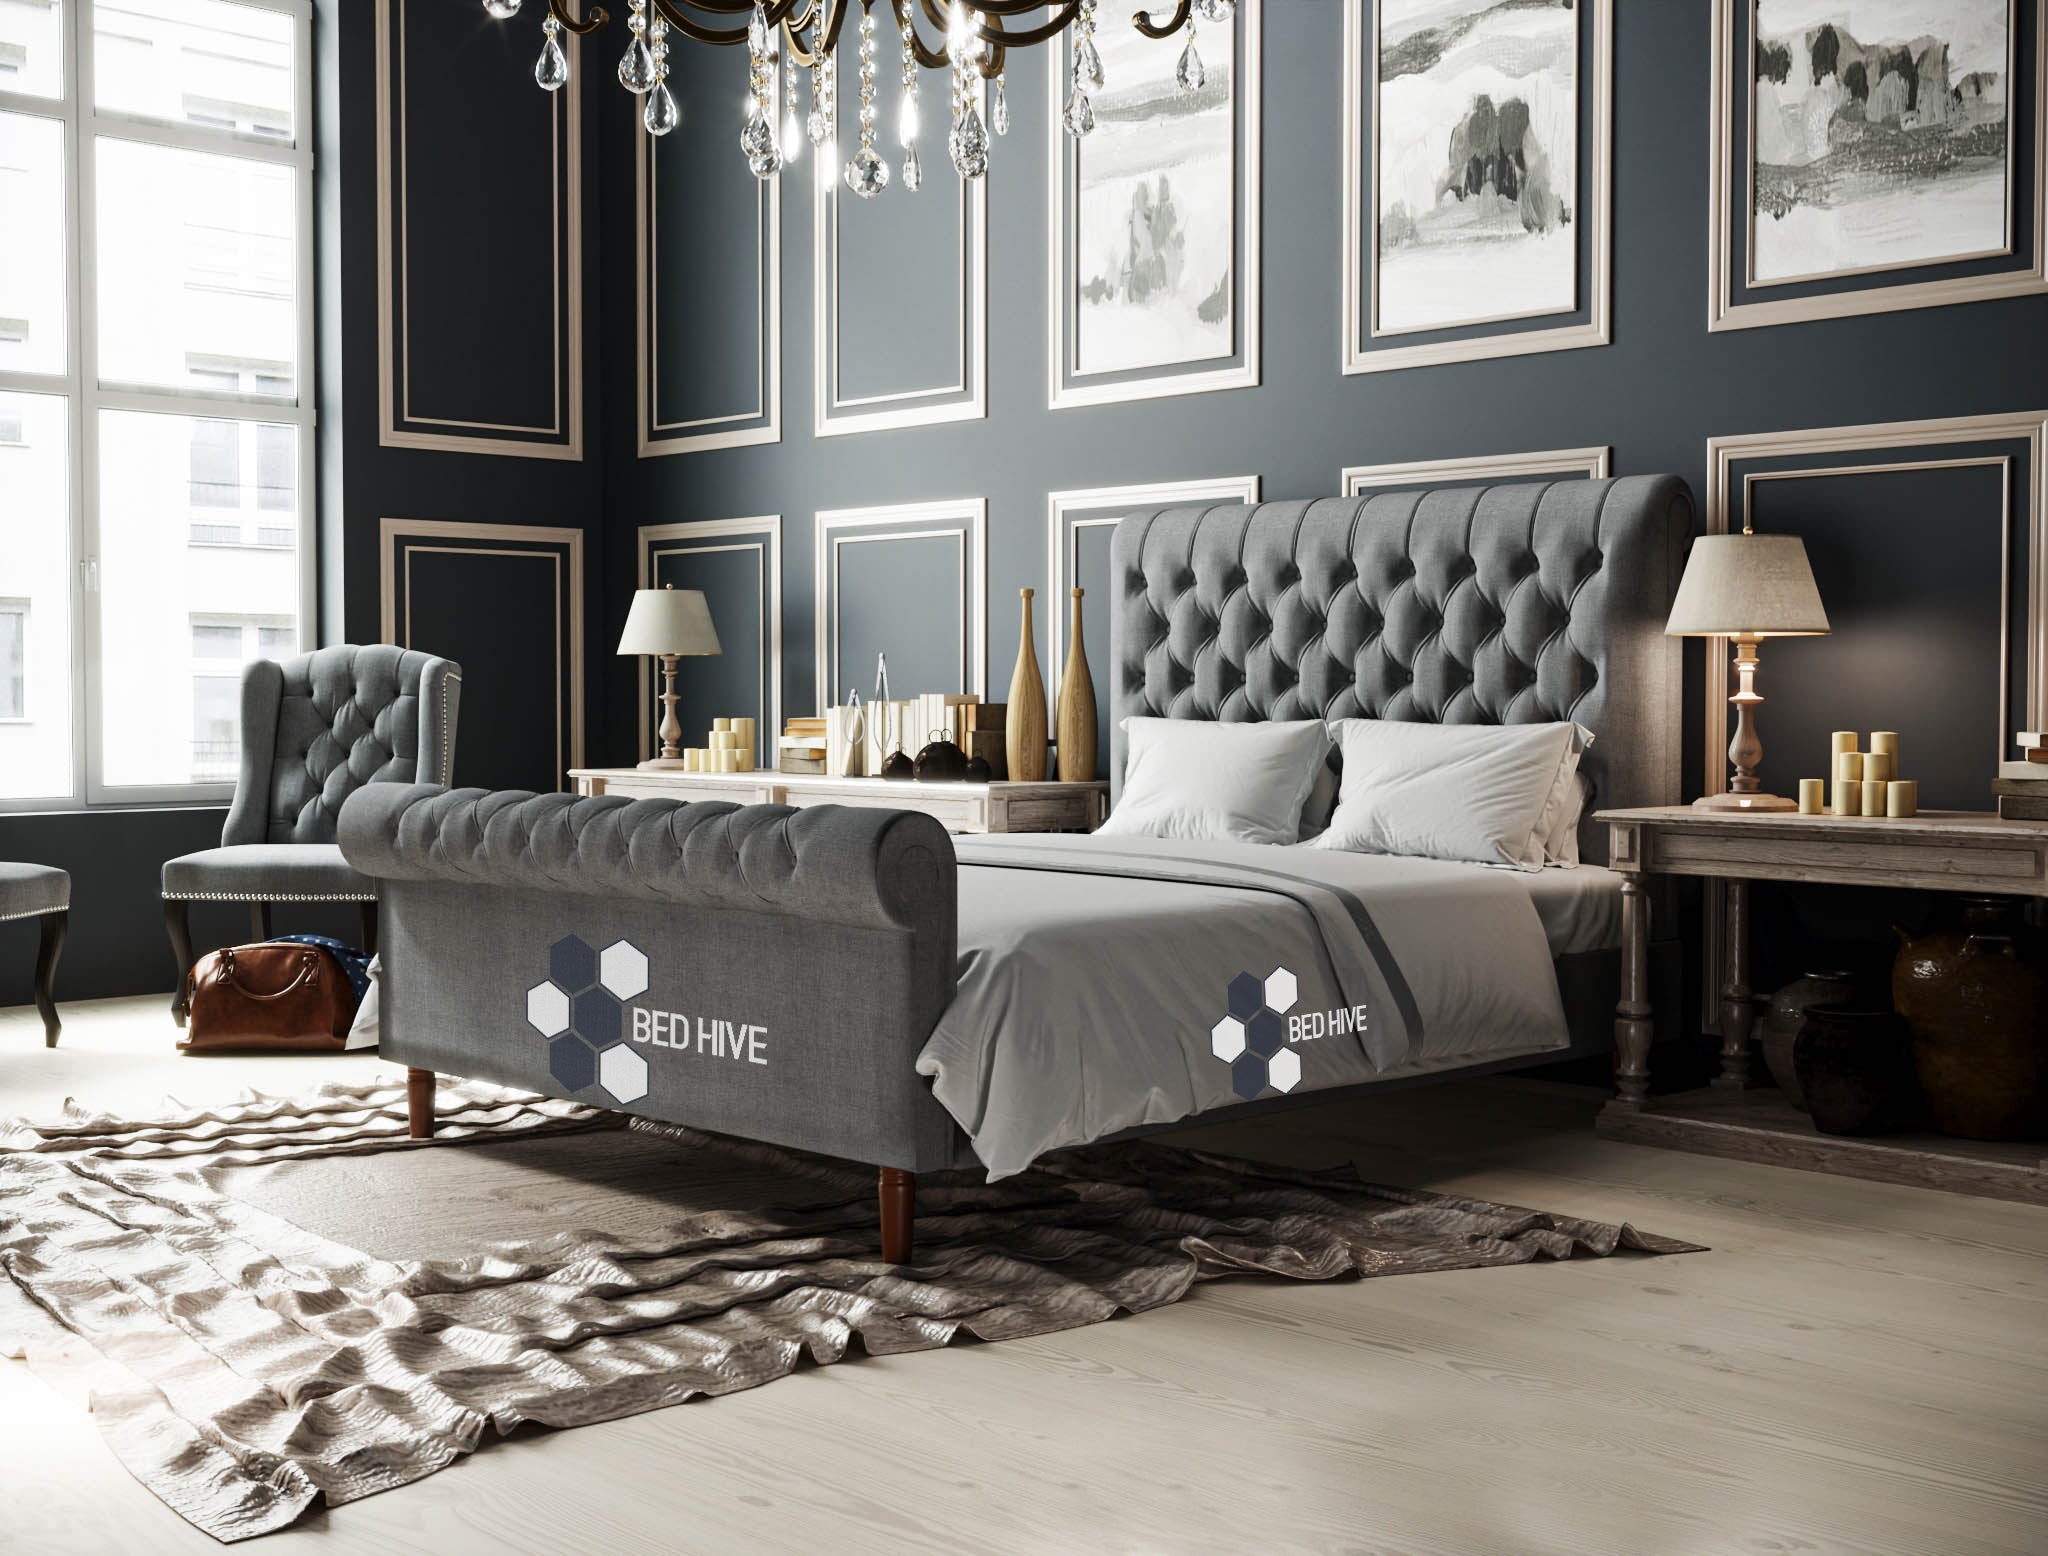 Esty Chesterfield Sleigh Bed, Sleigh Bed, Chesterfield bed, sleigh scroll bed, ottoman gas lift bed, underbed storage, chesterfield bed, Grey fabric bed, grey bed